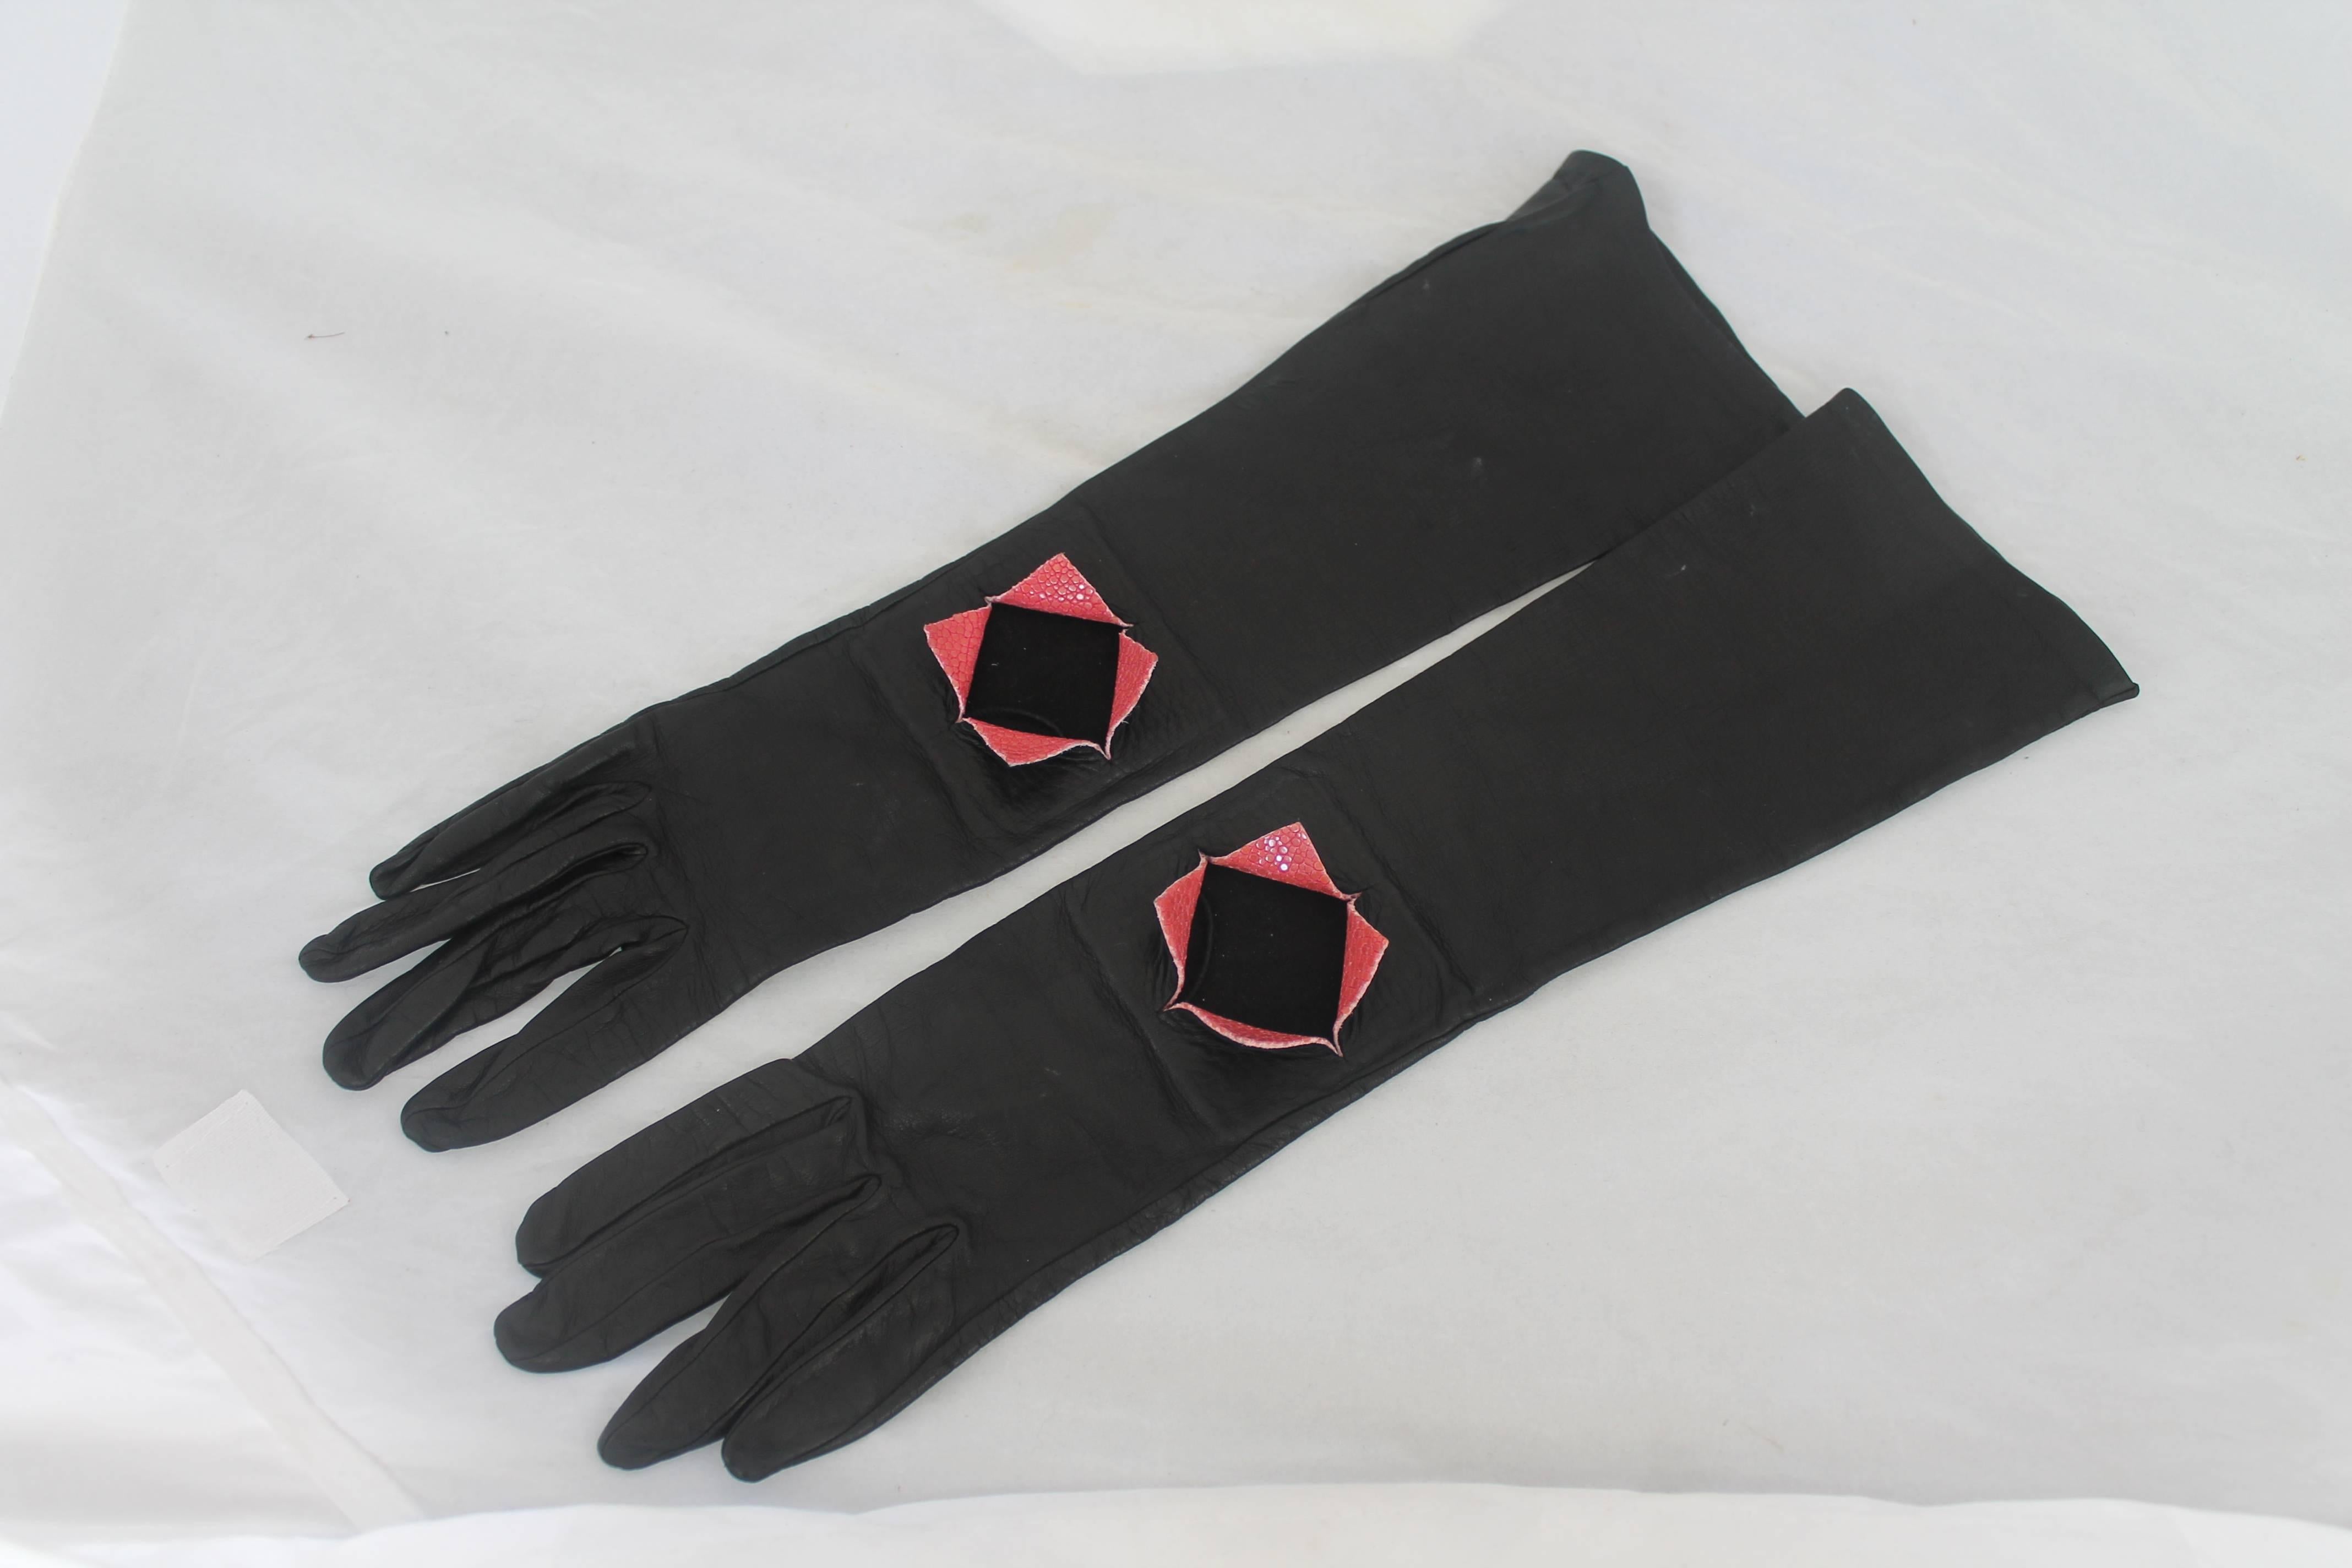 Chanel Black Kidskin Gloves with Pink Stingray Cutout - sz 7. These gloves are in very good condition with the only issue being slight marks (image 7) and another slight section of the same marks on the under the right glove. The stingray cutout is